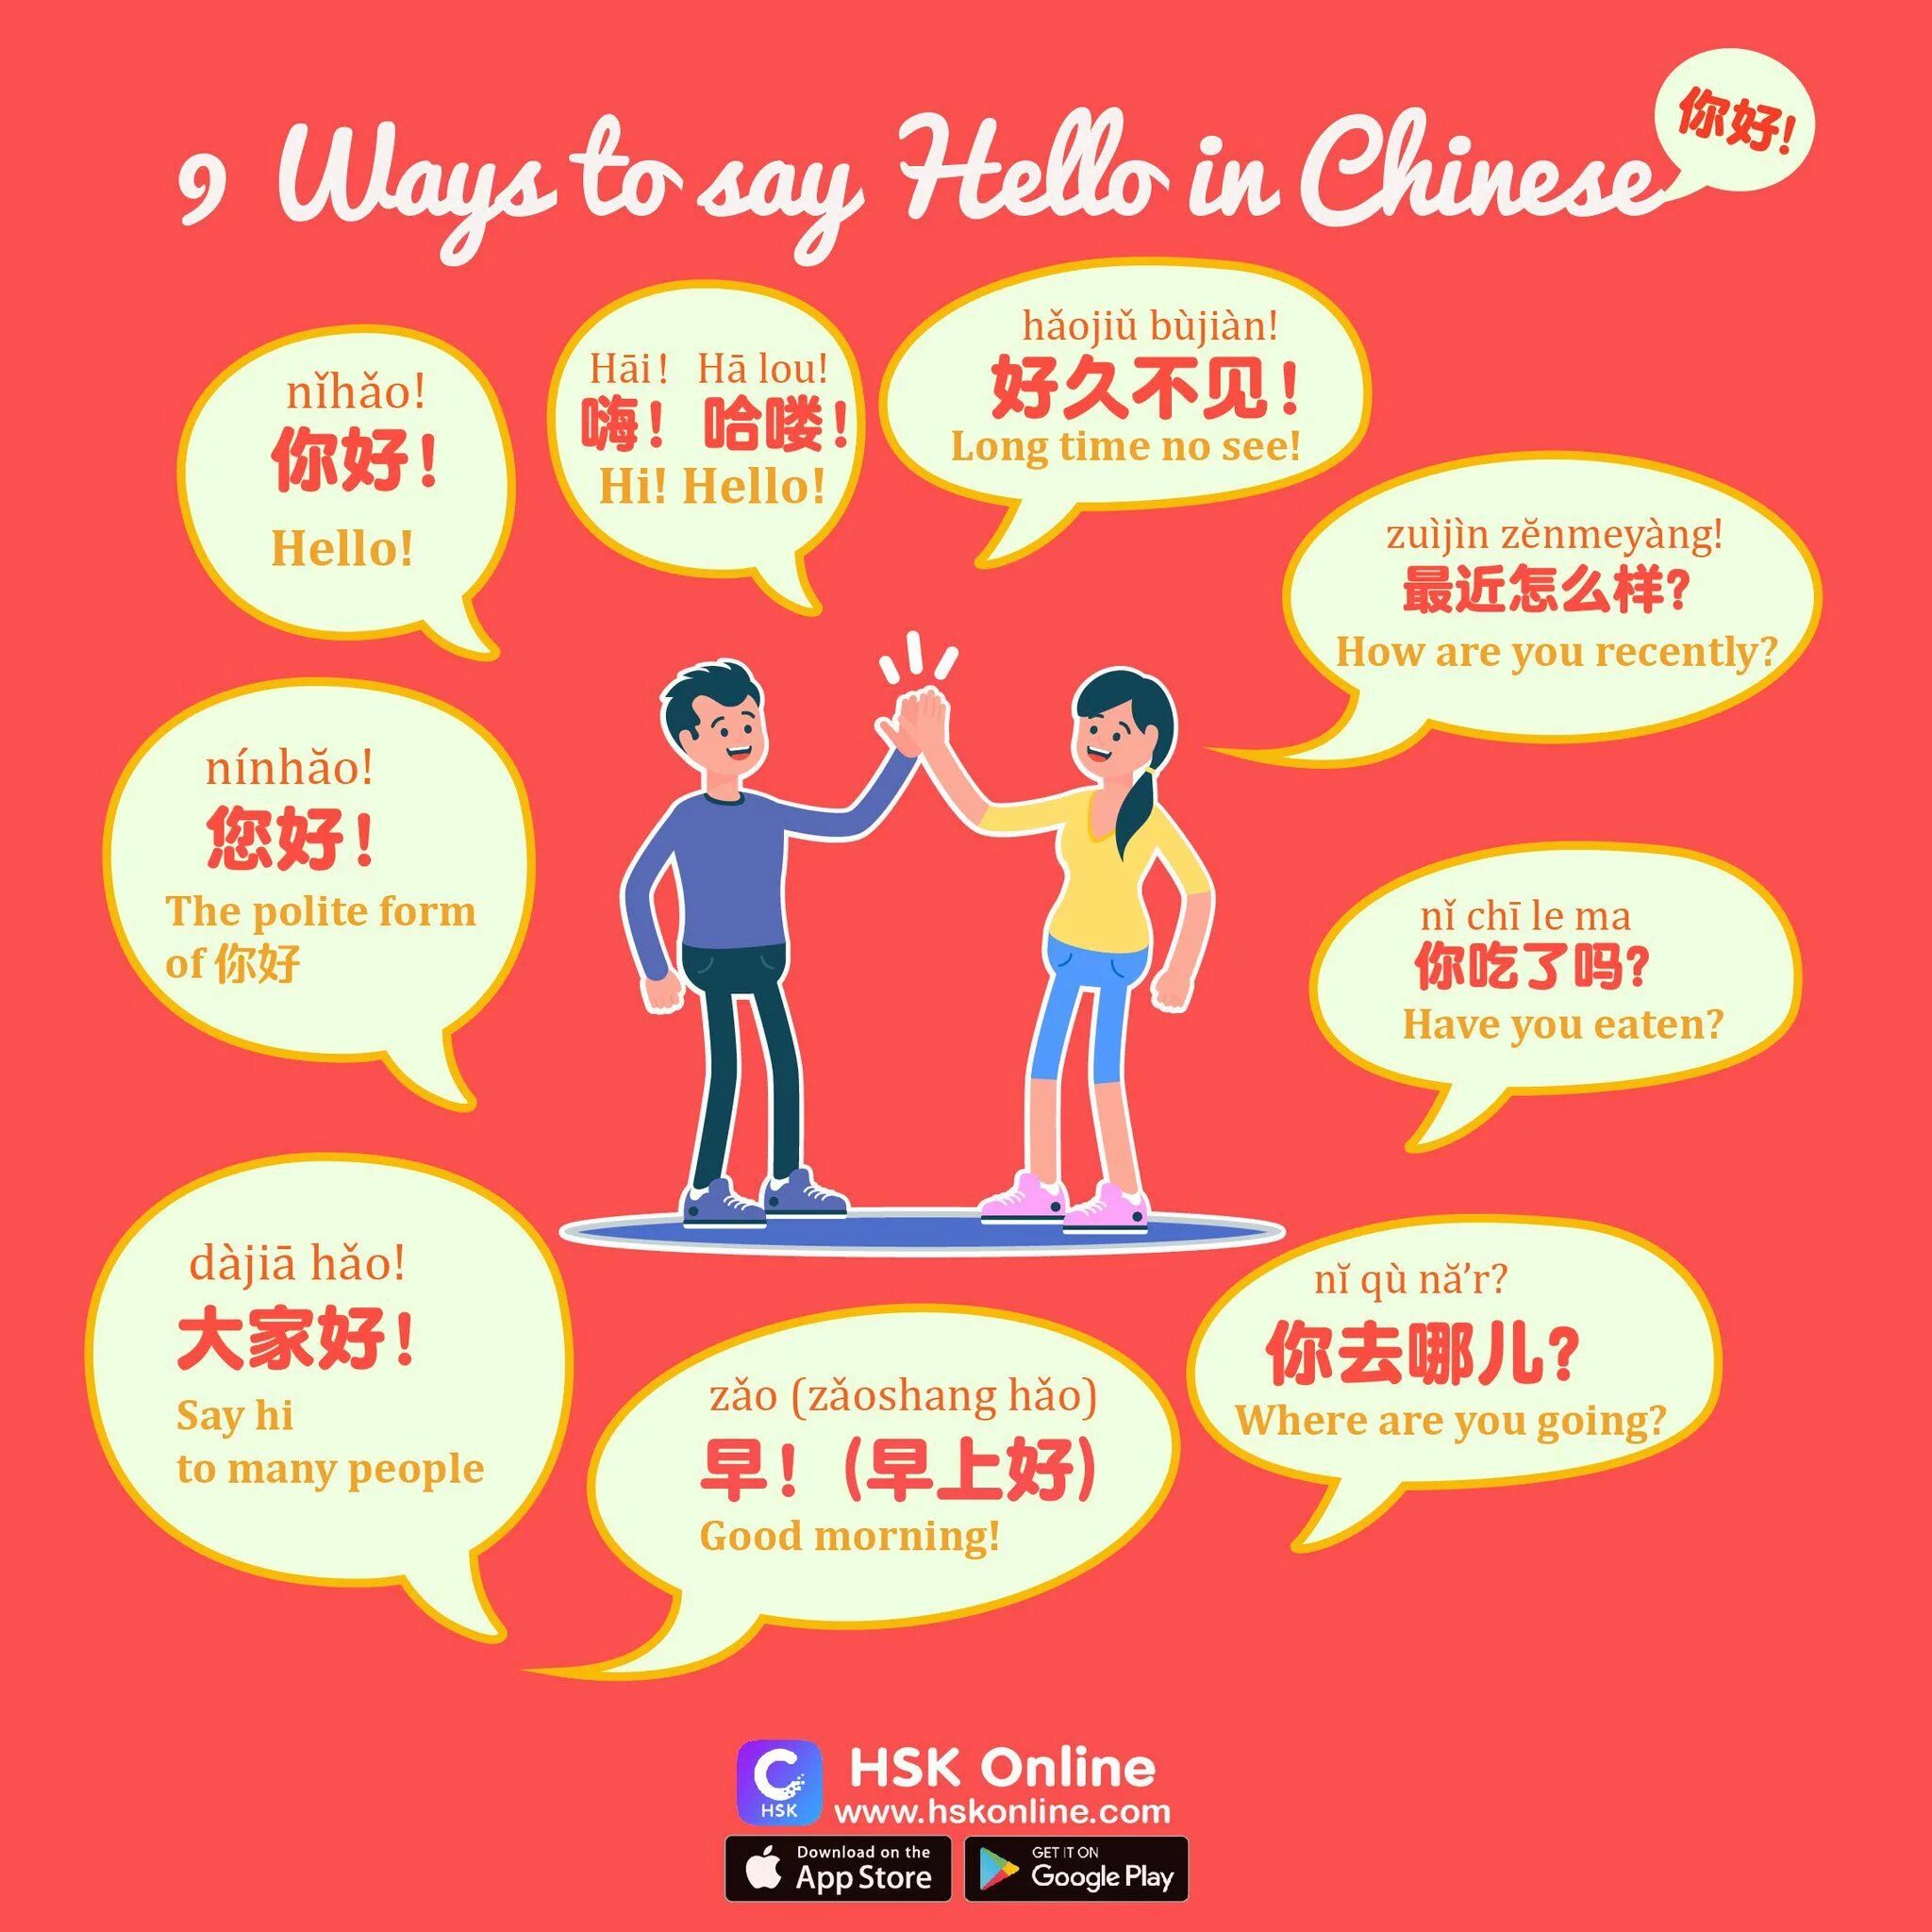 See your hello. Different ways to say hello. Ways of saying hello. To say hello. Different ways to say hello in English.